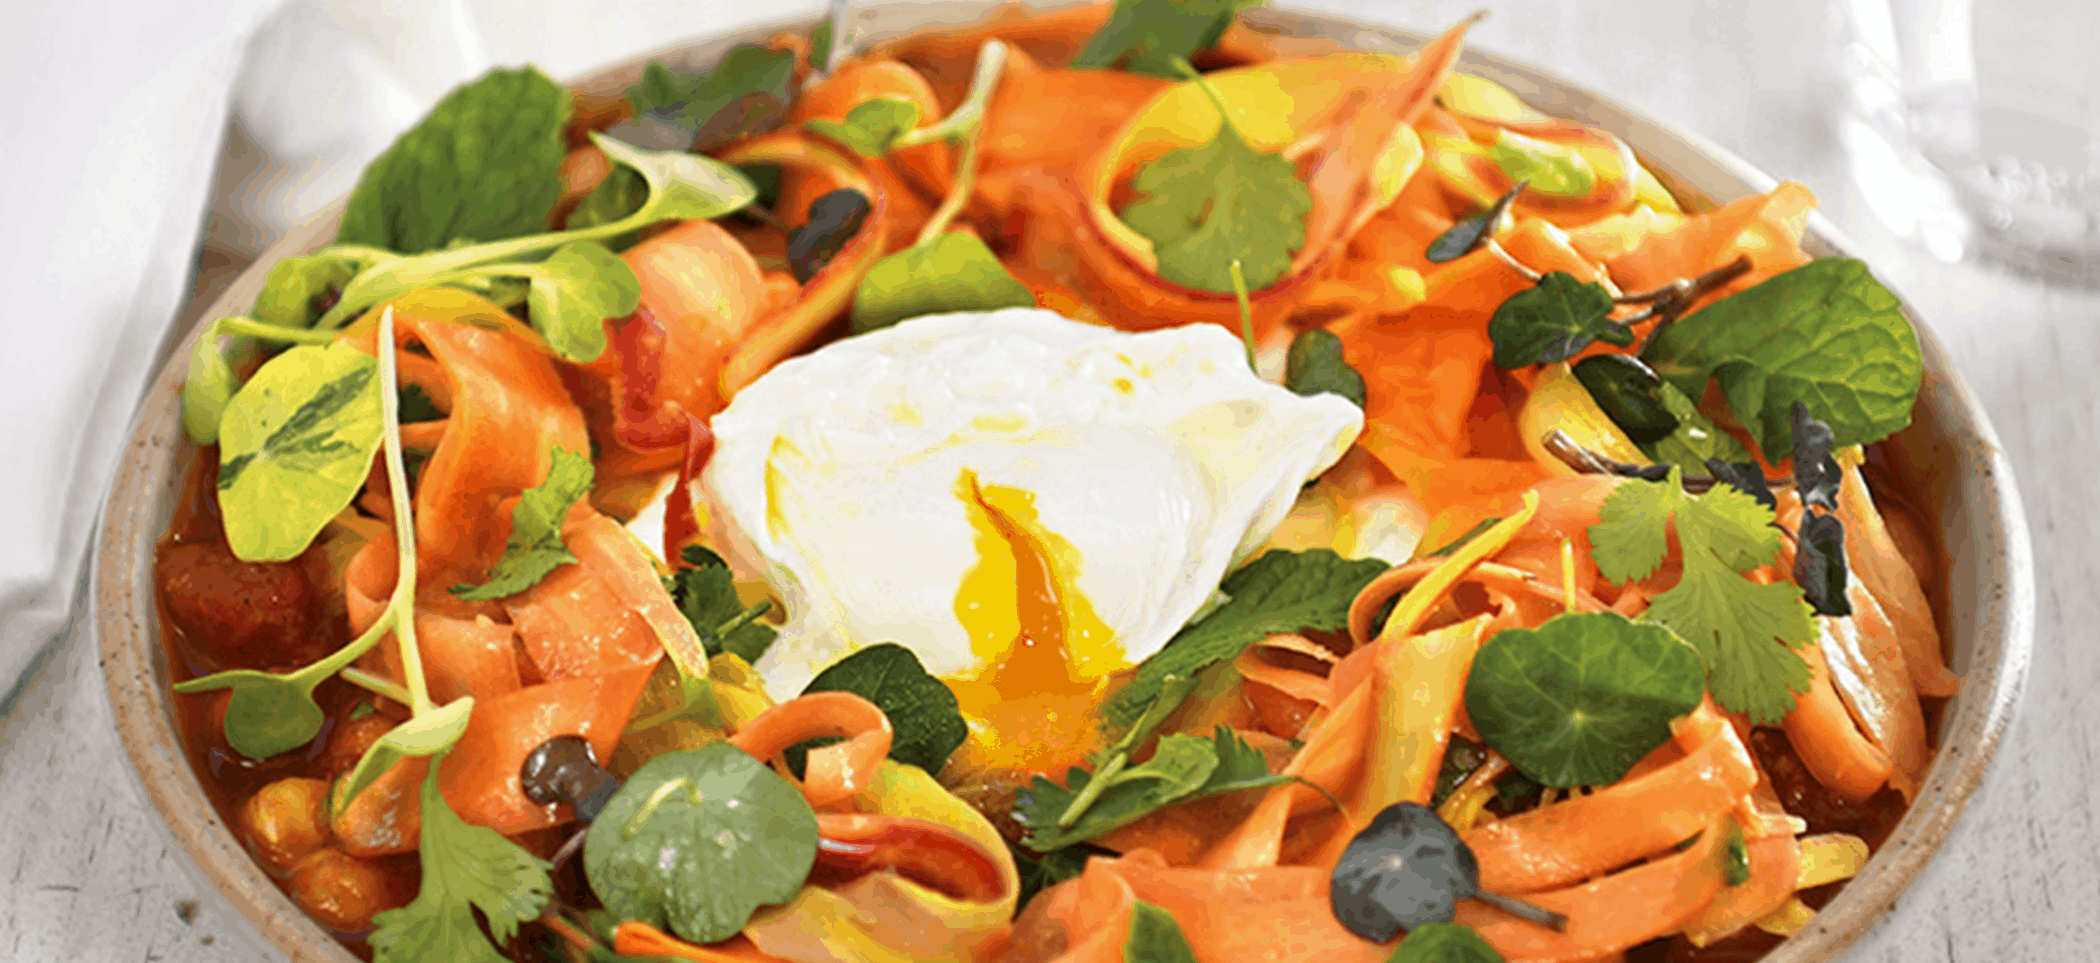 Chickpeas with Spiced Tomato Sauce, Carrot & Preserved Lemon Salad & Poached Eggs